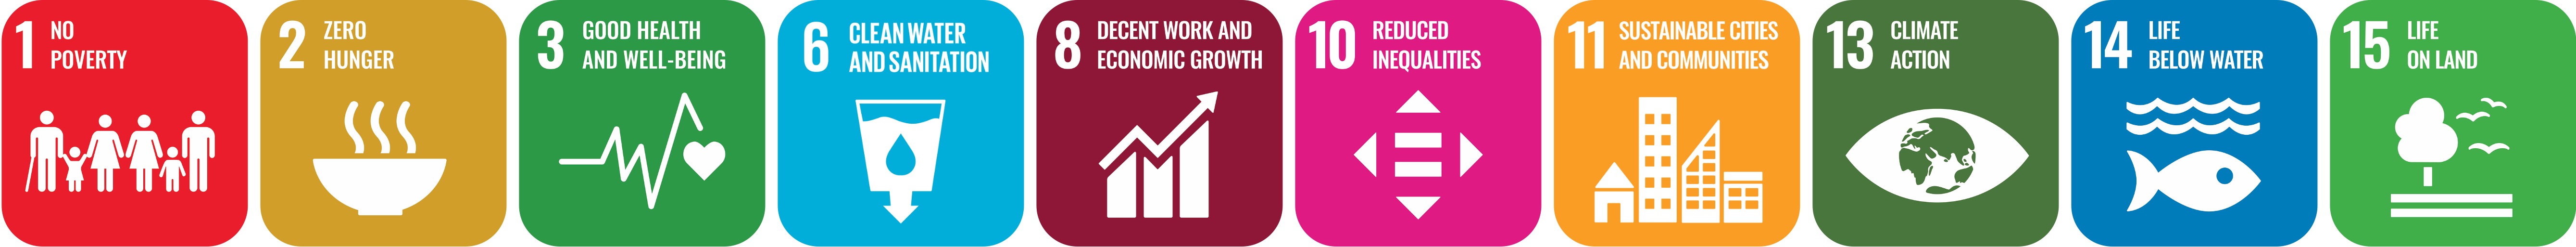 Picture displaying the UN goals